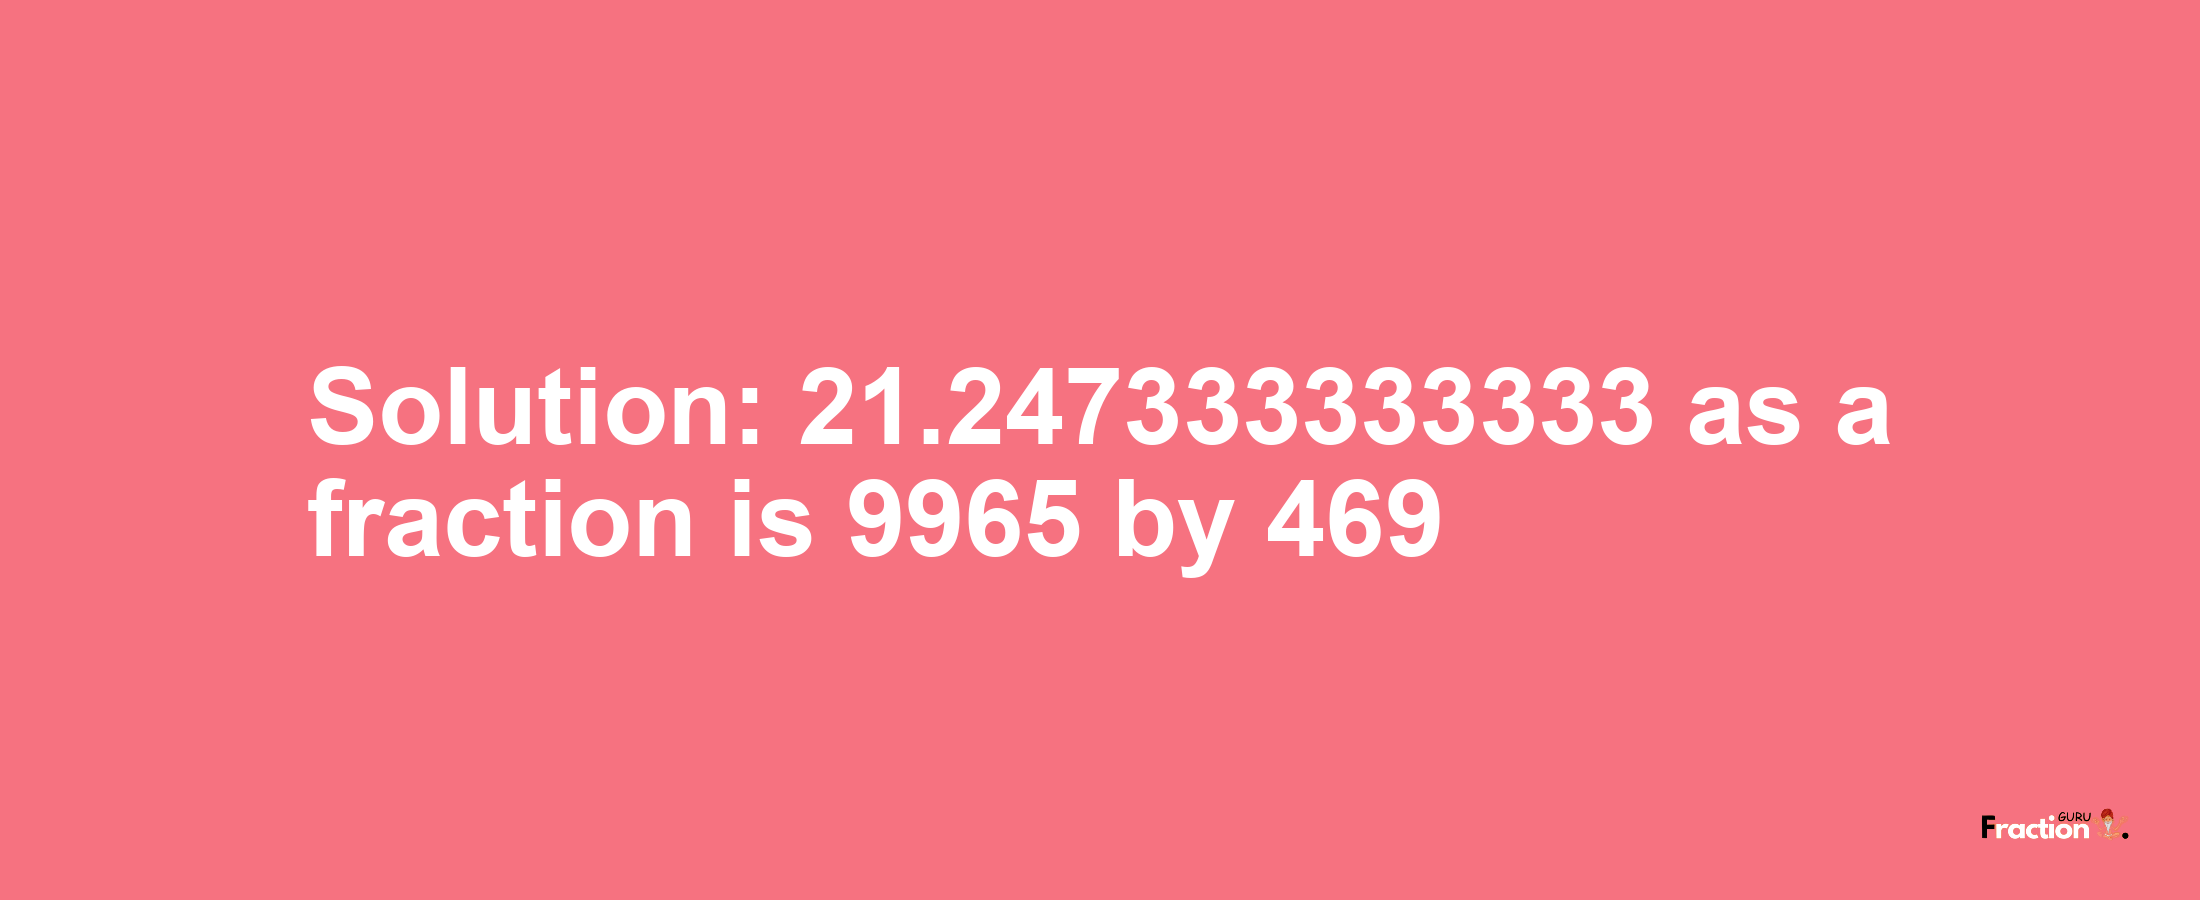 Solution:21.247333333333 as a fraction is 9965/469